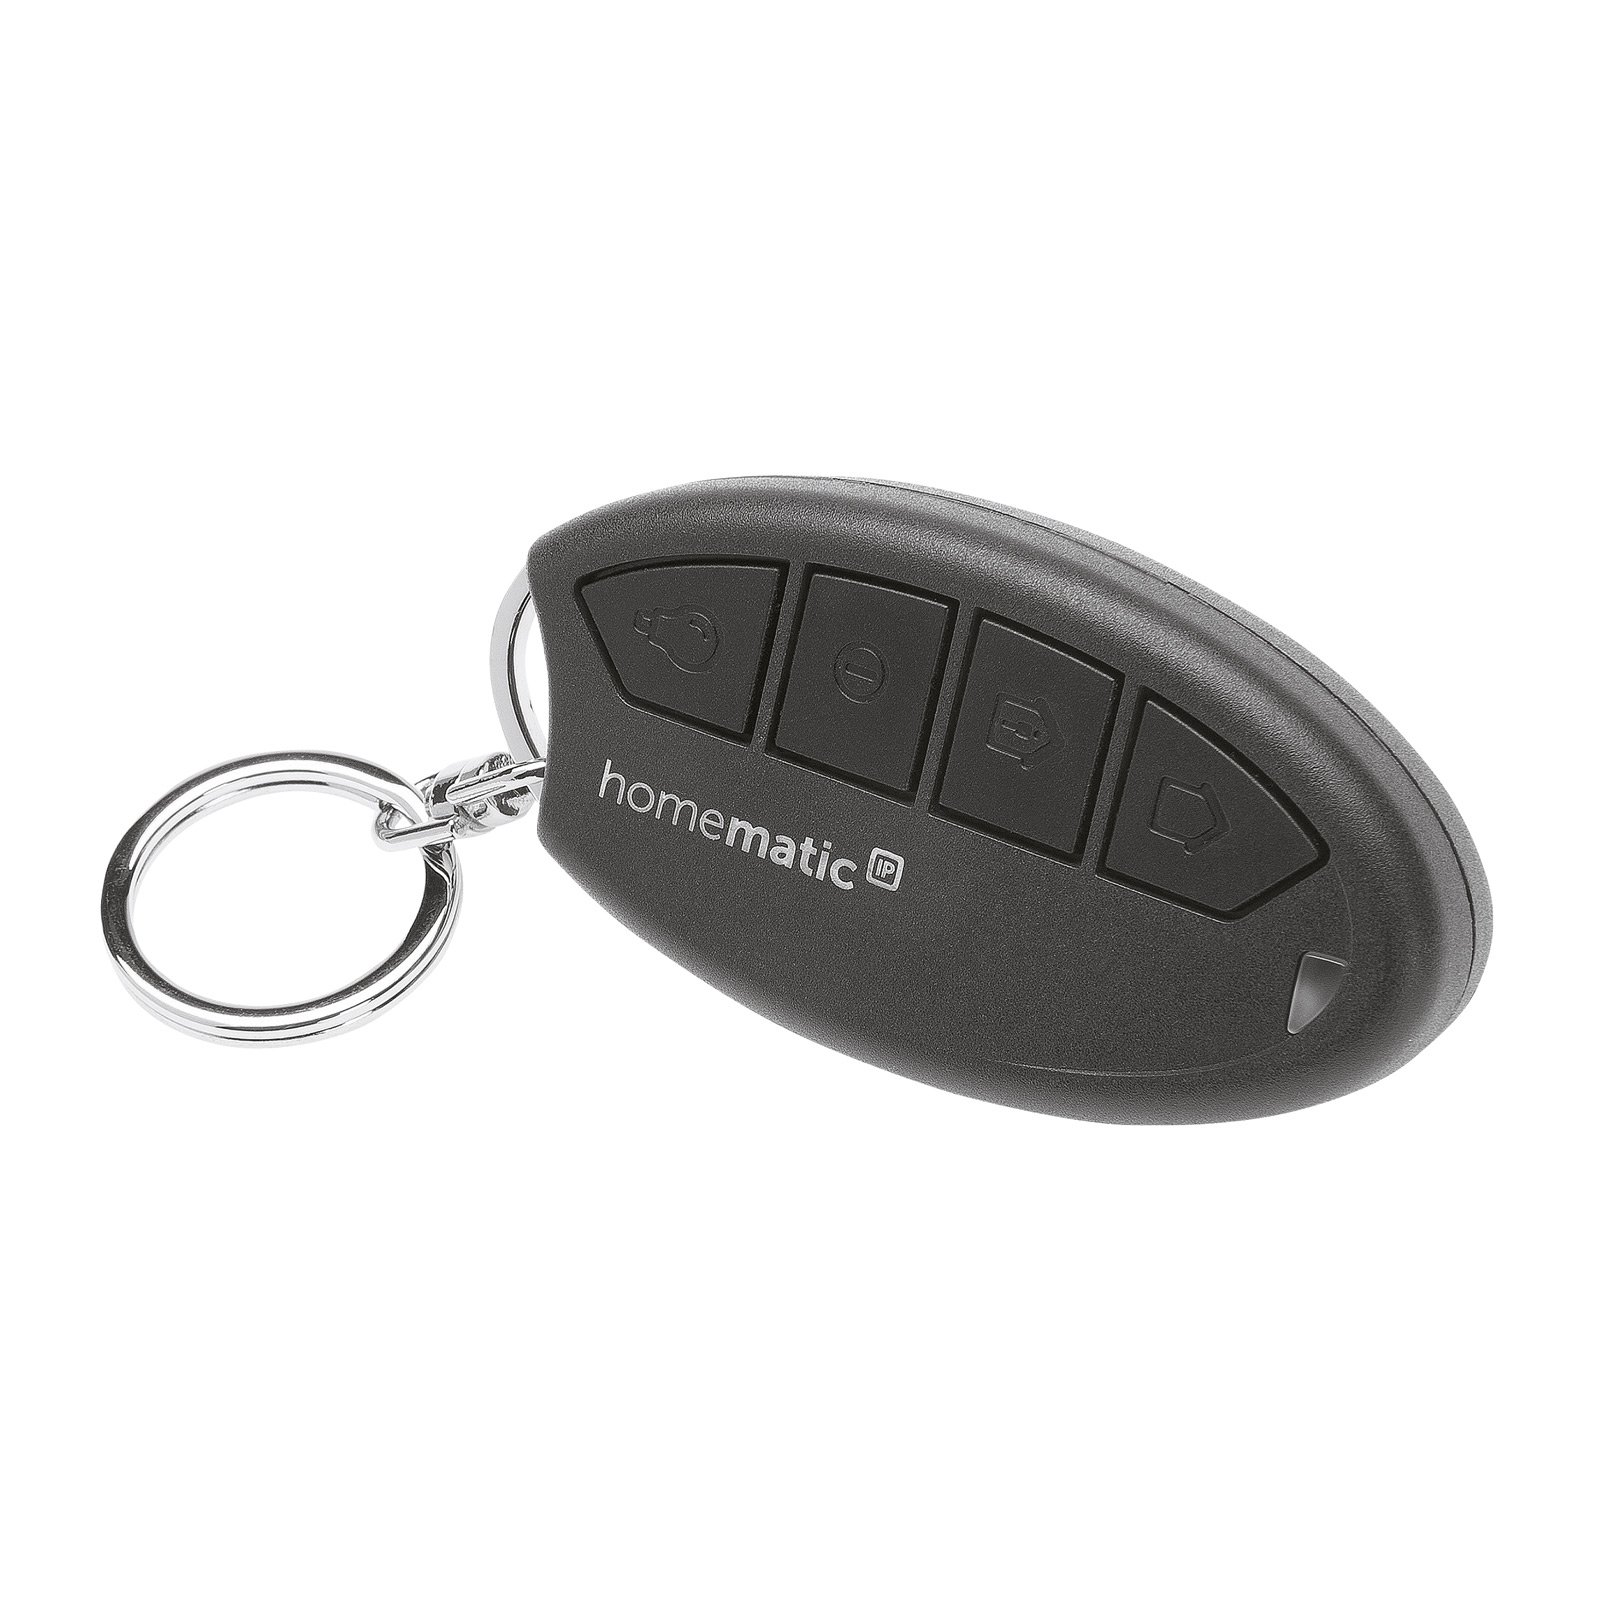 Homematic IP key ring remote control for alarm